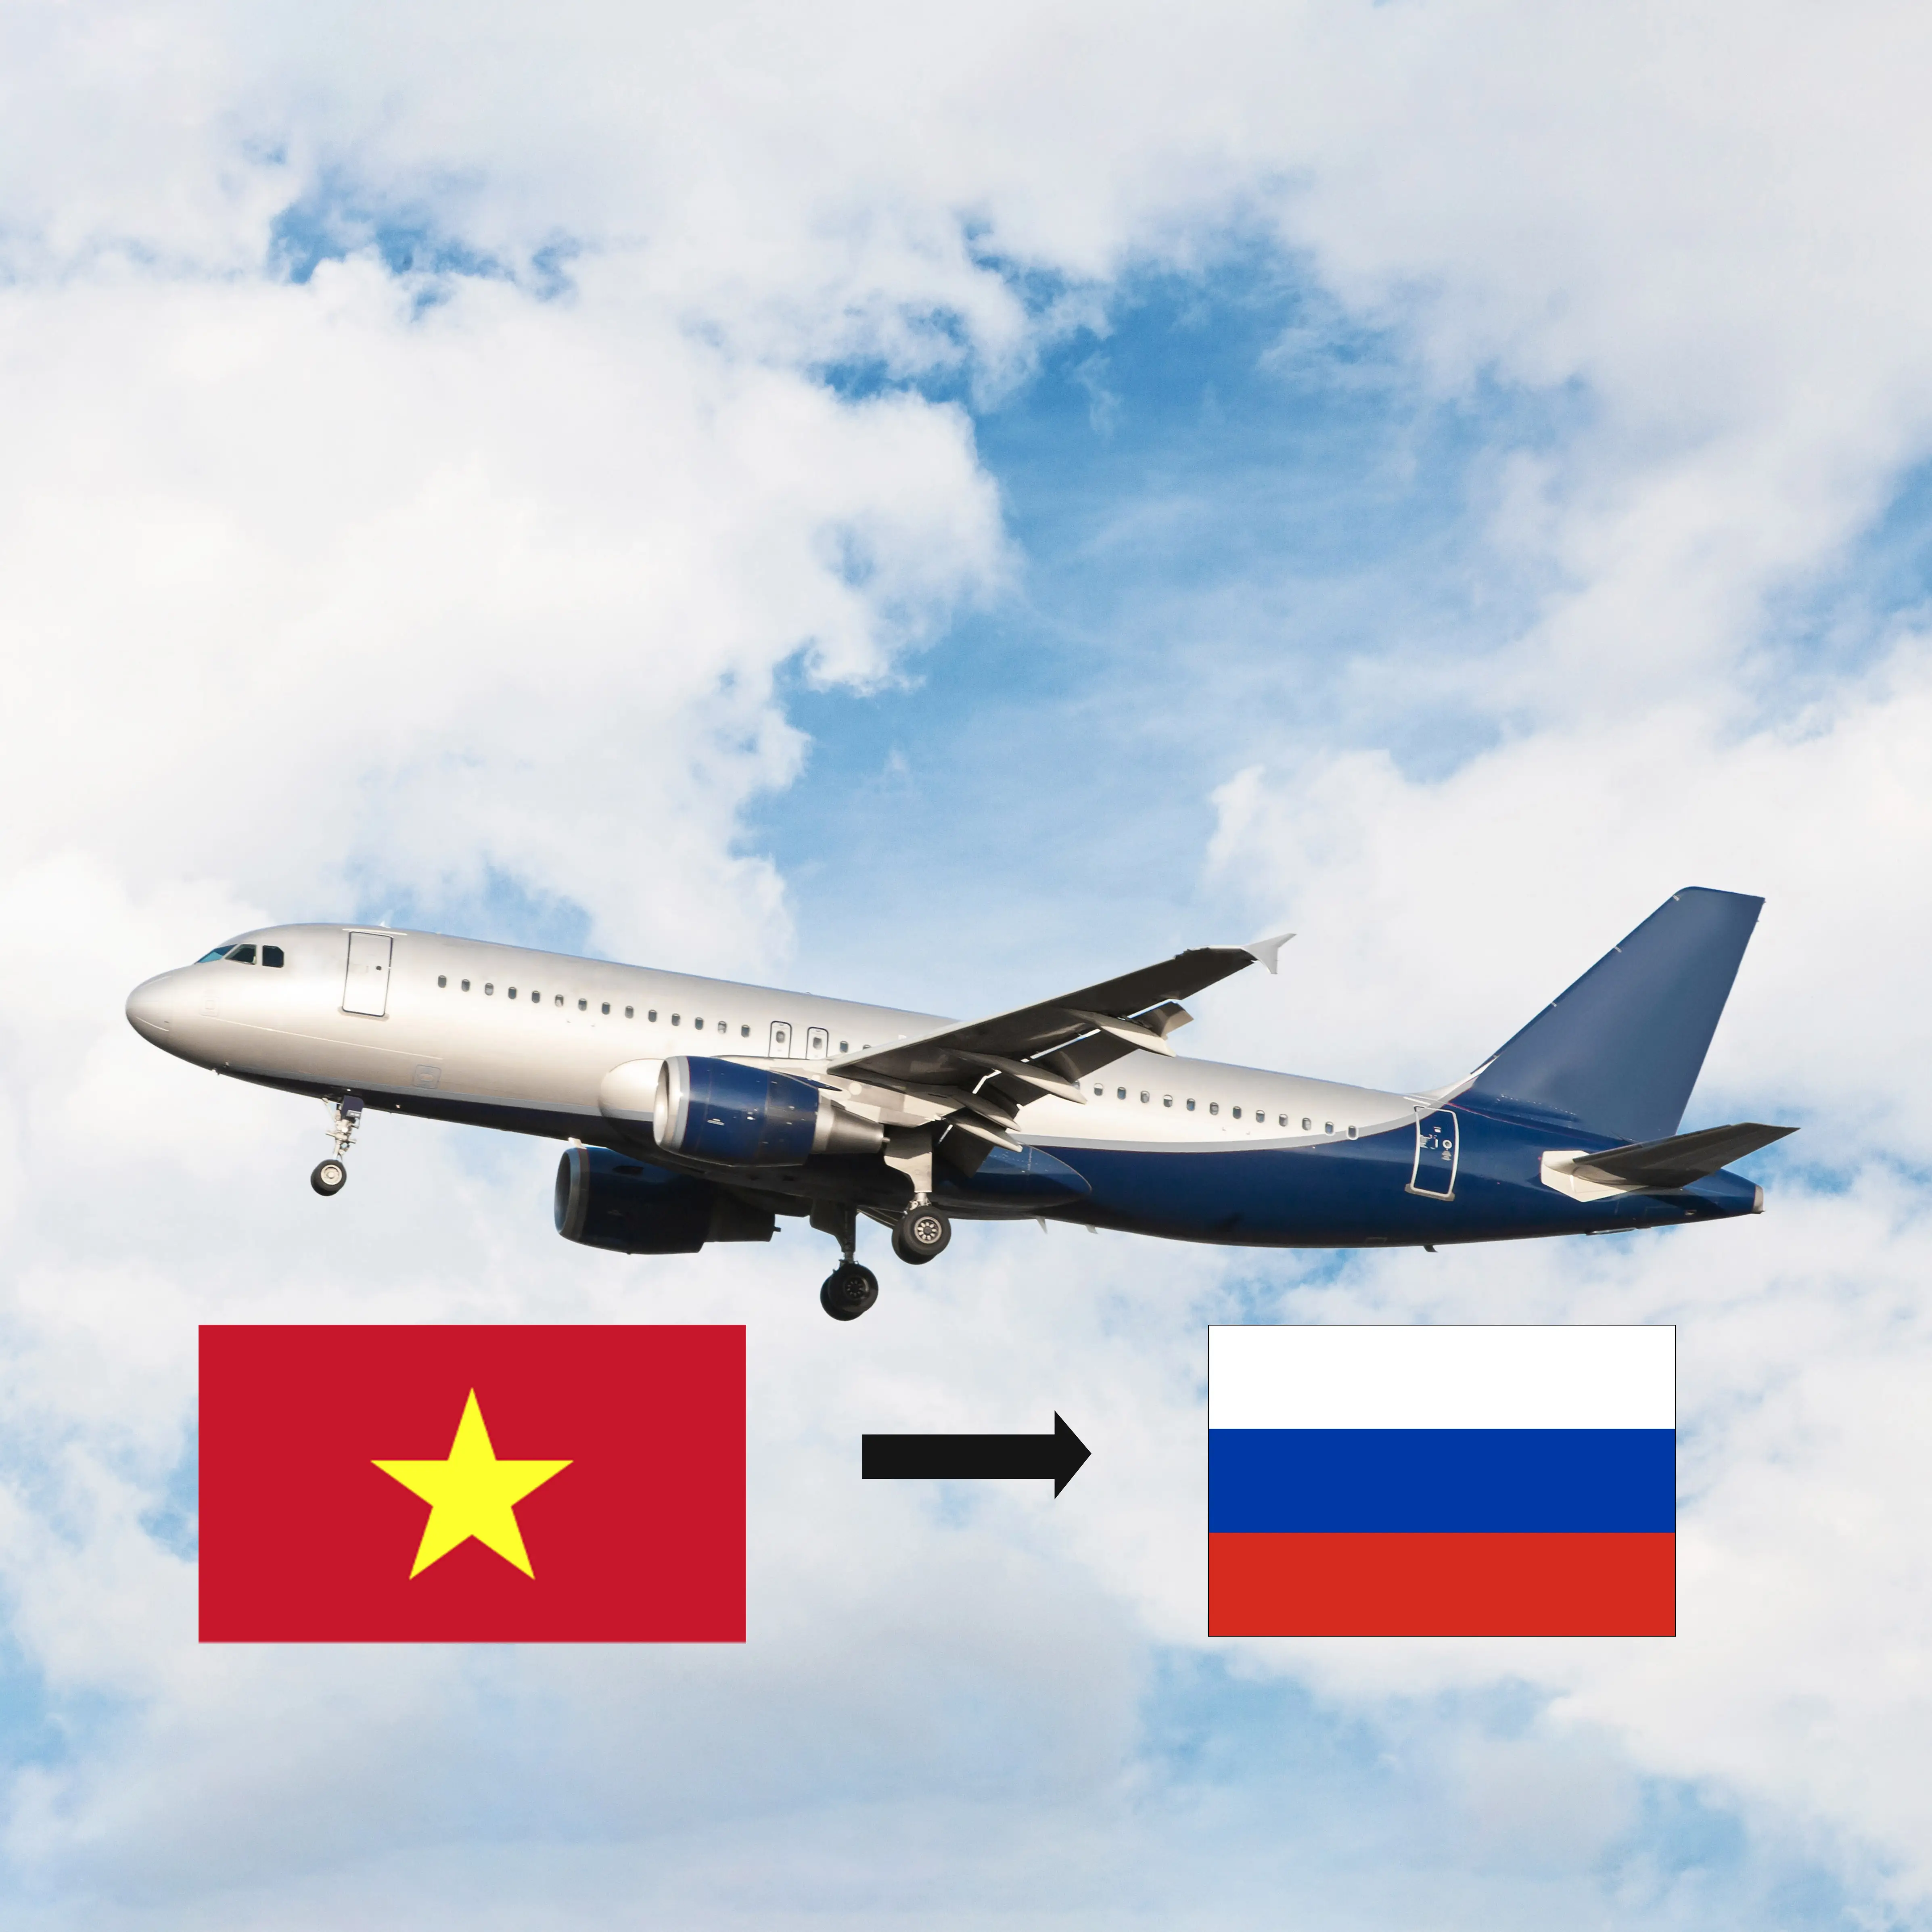 Shipping from Vietnam to Russia (Moscow and all Main ports) - Air, sea, land transportation available